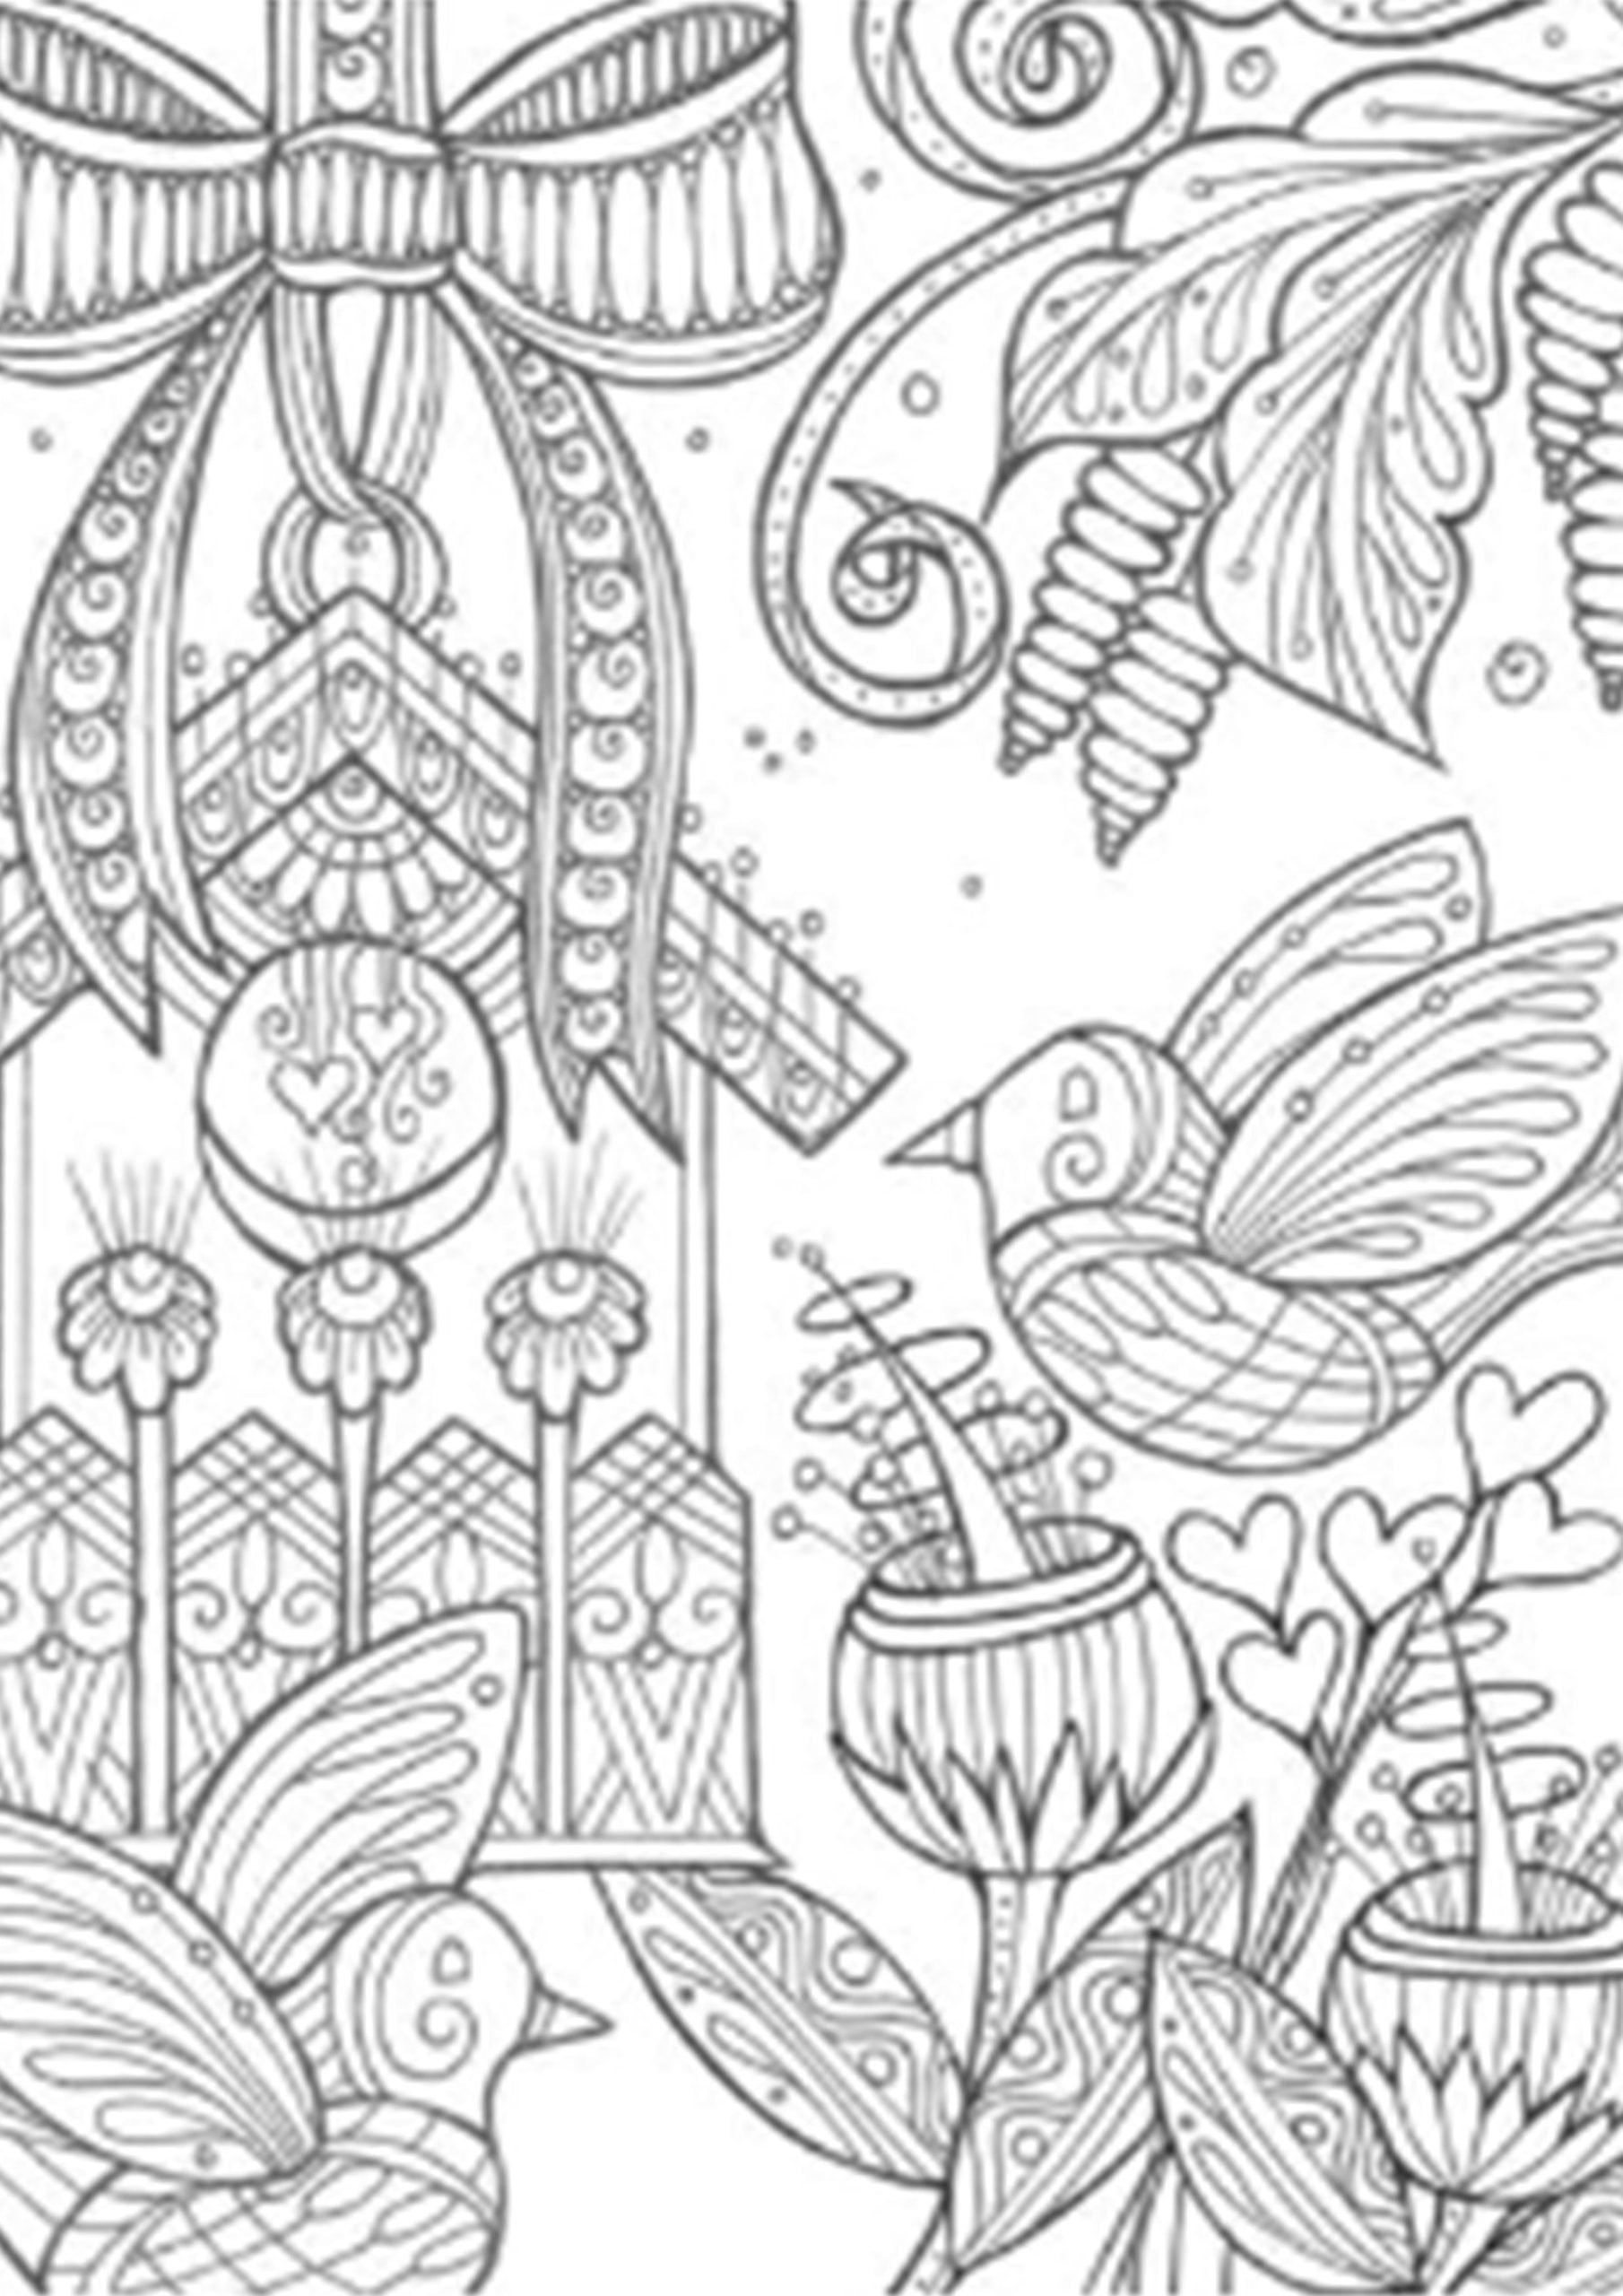 Stár Wárs Coloring Book: 55+ High-Quality Coloring Pages Related